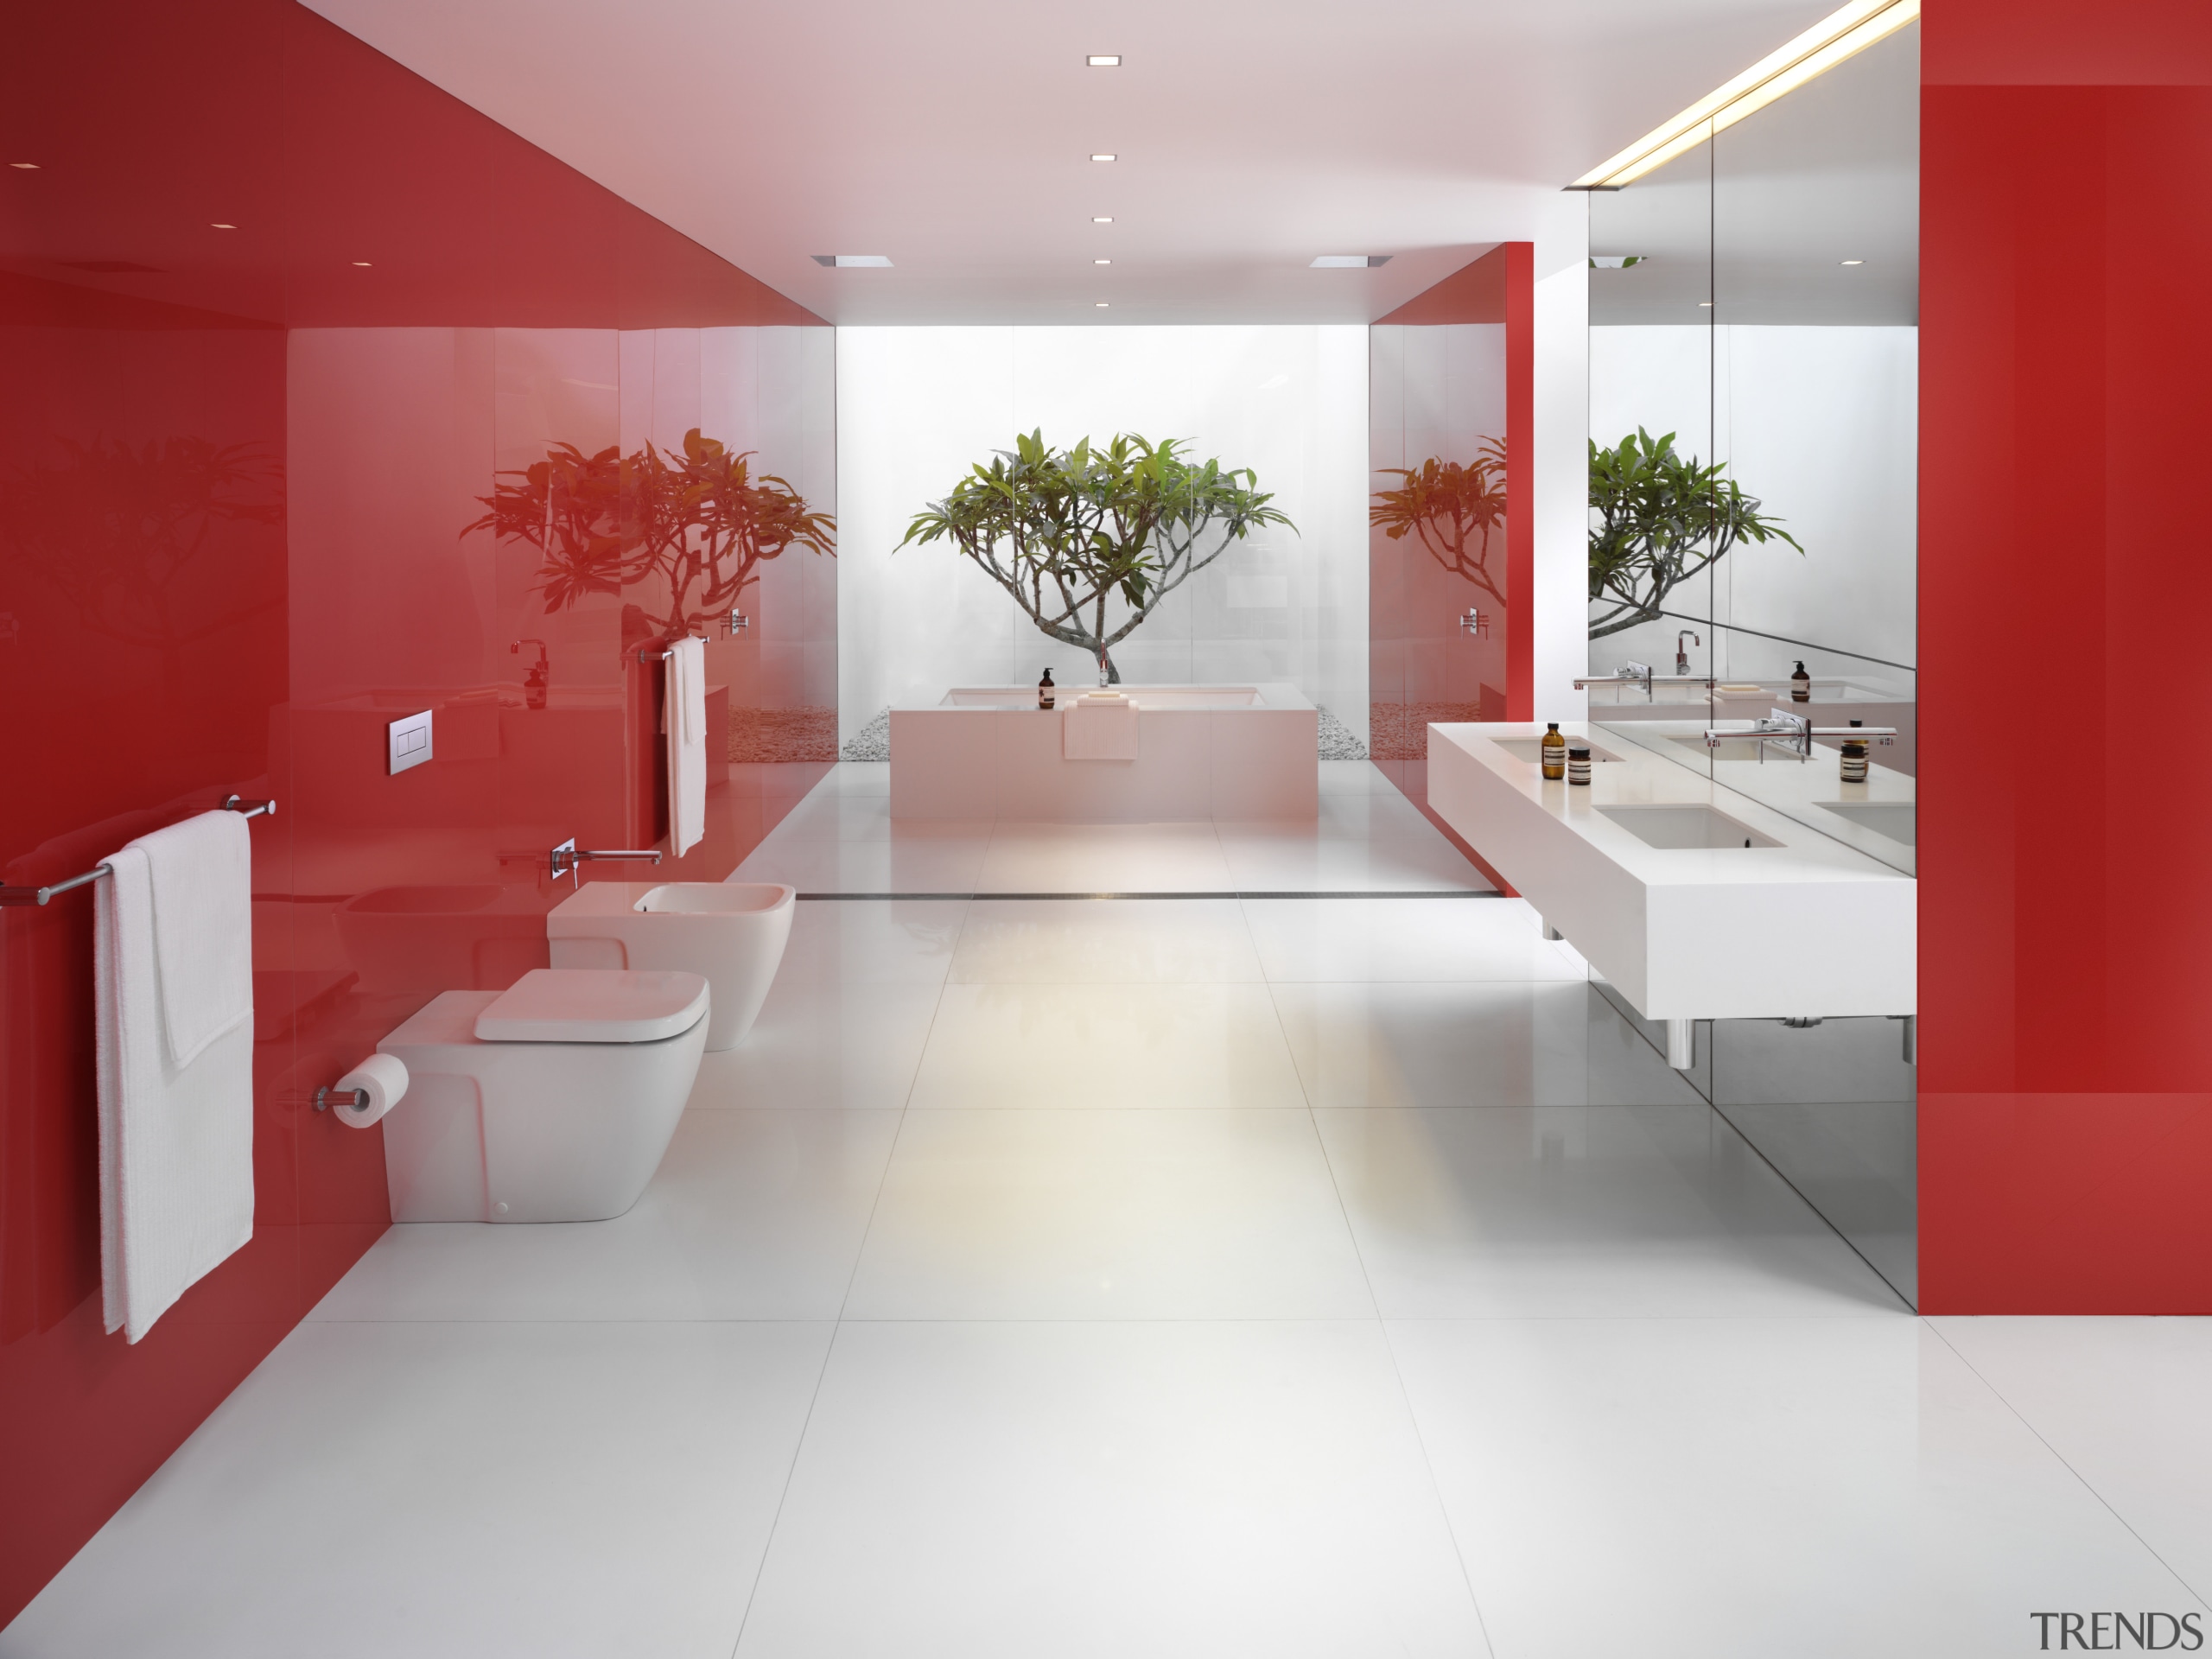 View of a bathroom designed by Ian Moore architecture, bathroom, ceiling, floor, flooring, interior design, lobby, product design, tile, wall, white, red